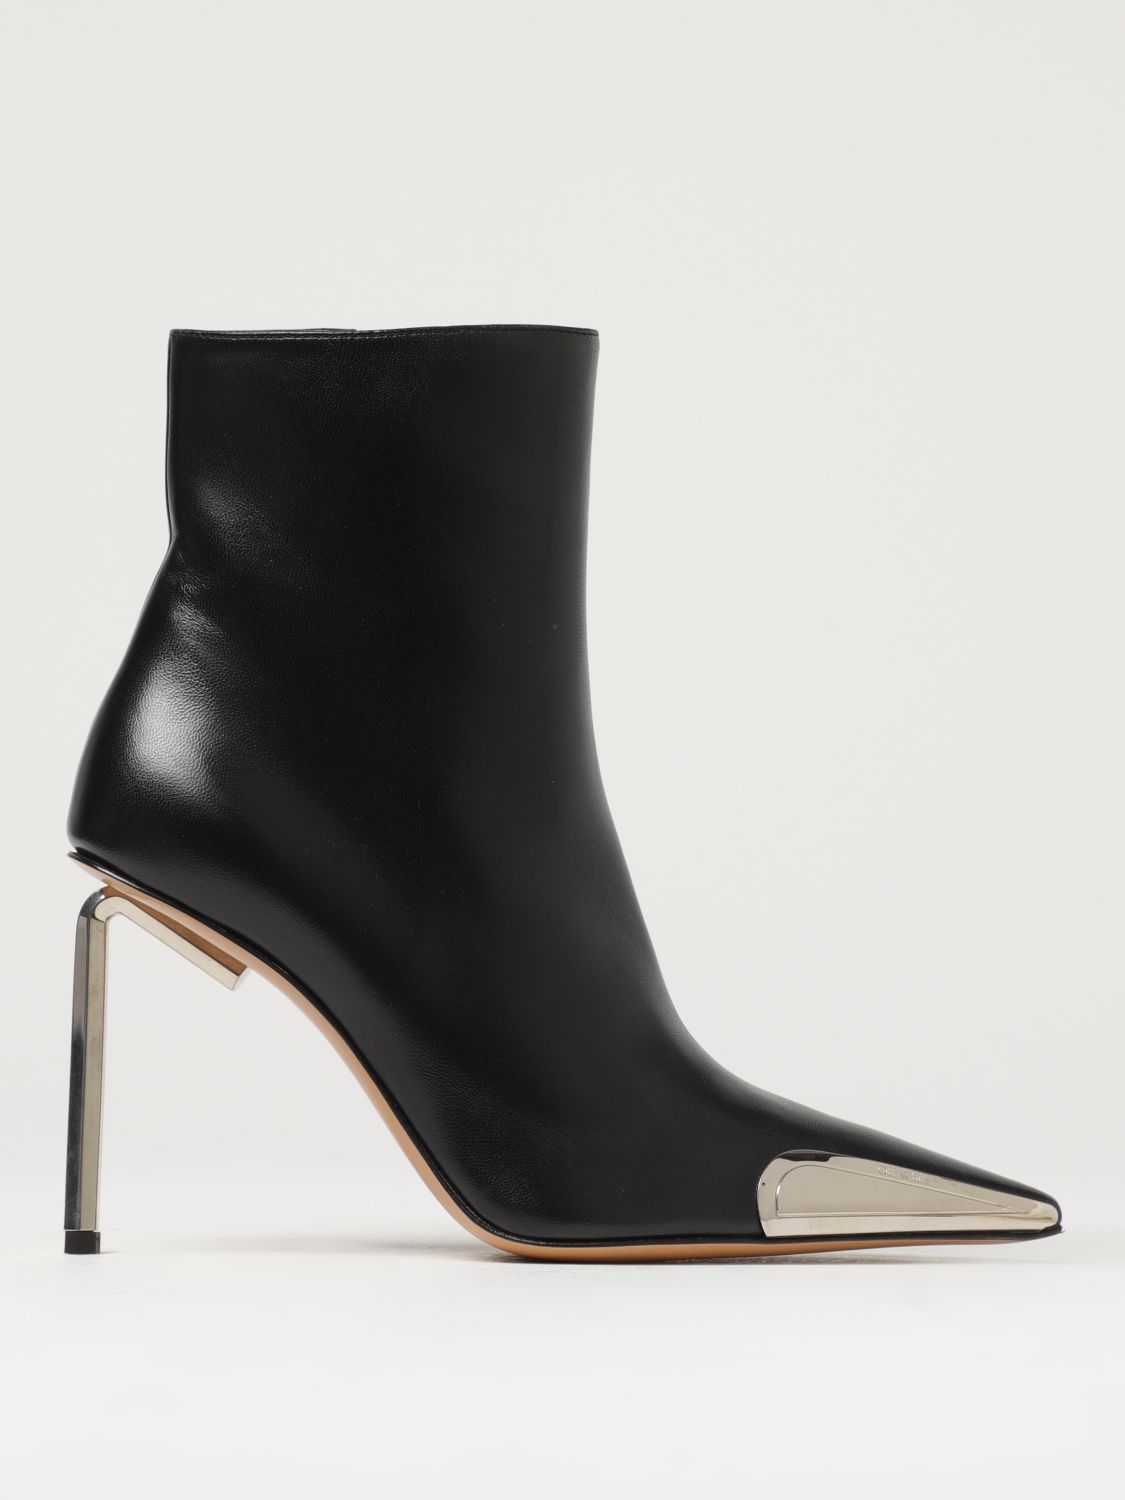 OFF-WHITE ALLEN FRAME ANKLE BOOTS IN NAPPA LEATHER,E75493002